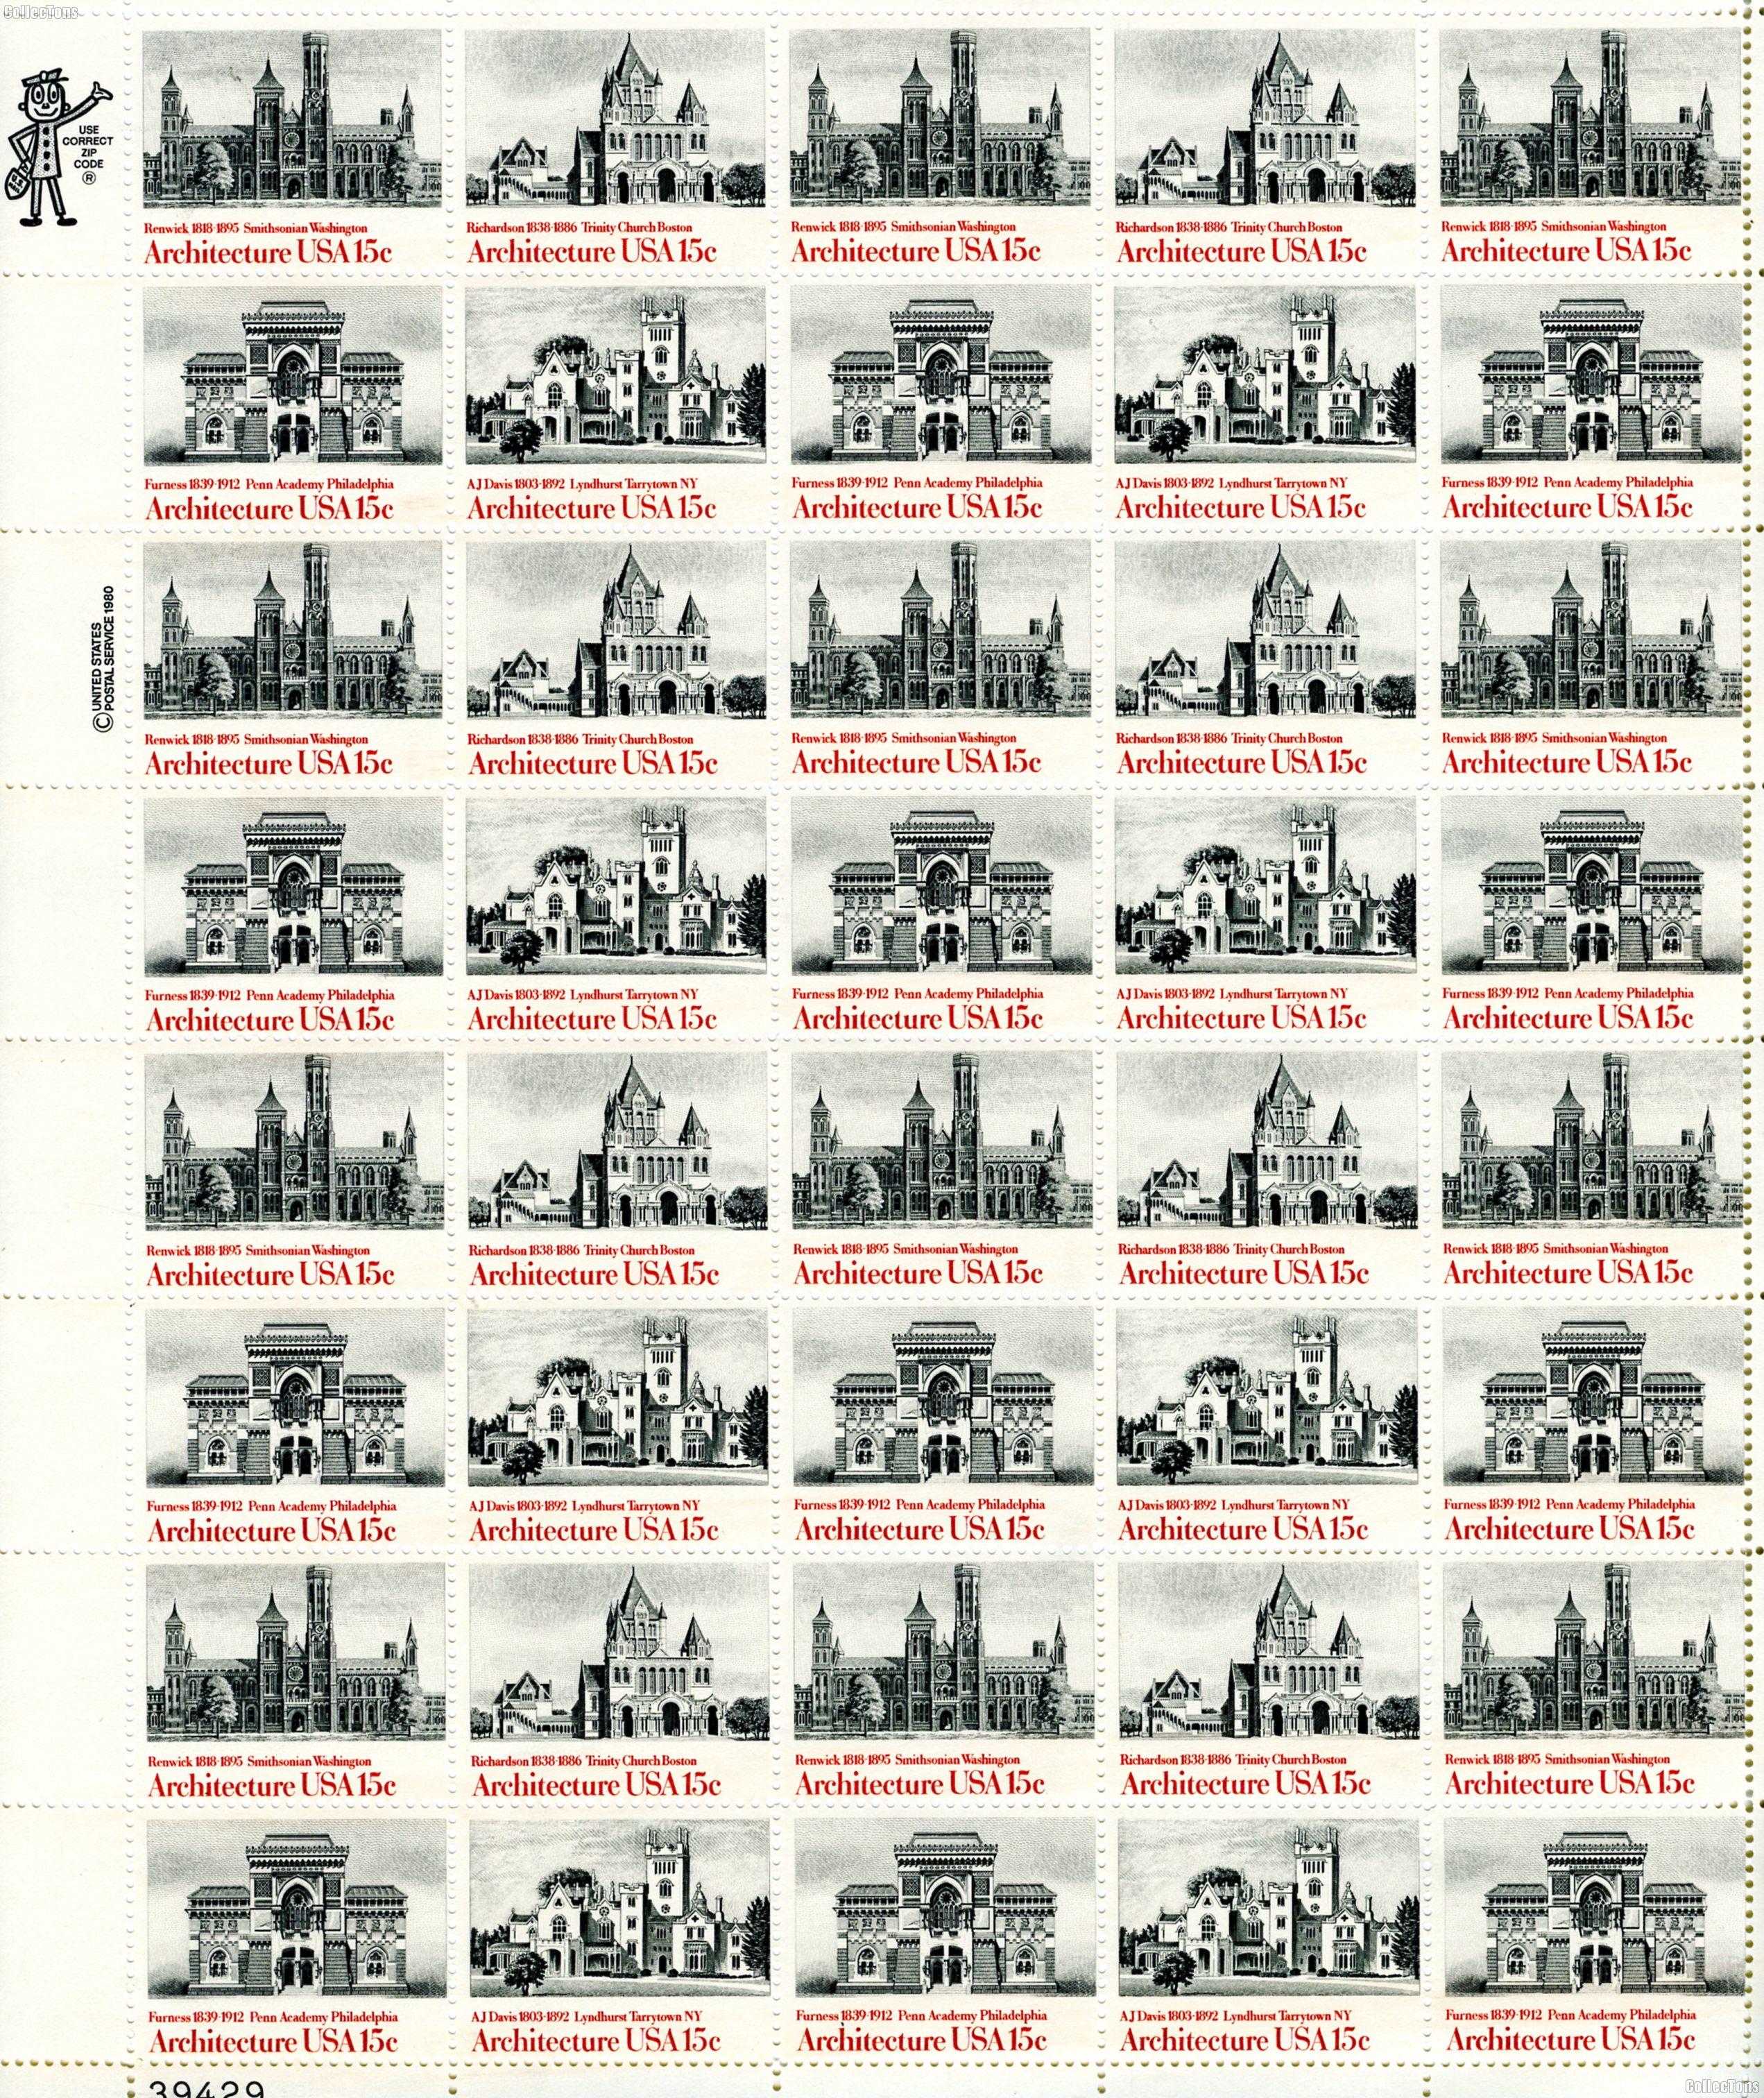 1980 Architecture 15 Cent US Postage Stamp MNH Sheet of 50 Scott #1838-1841